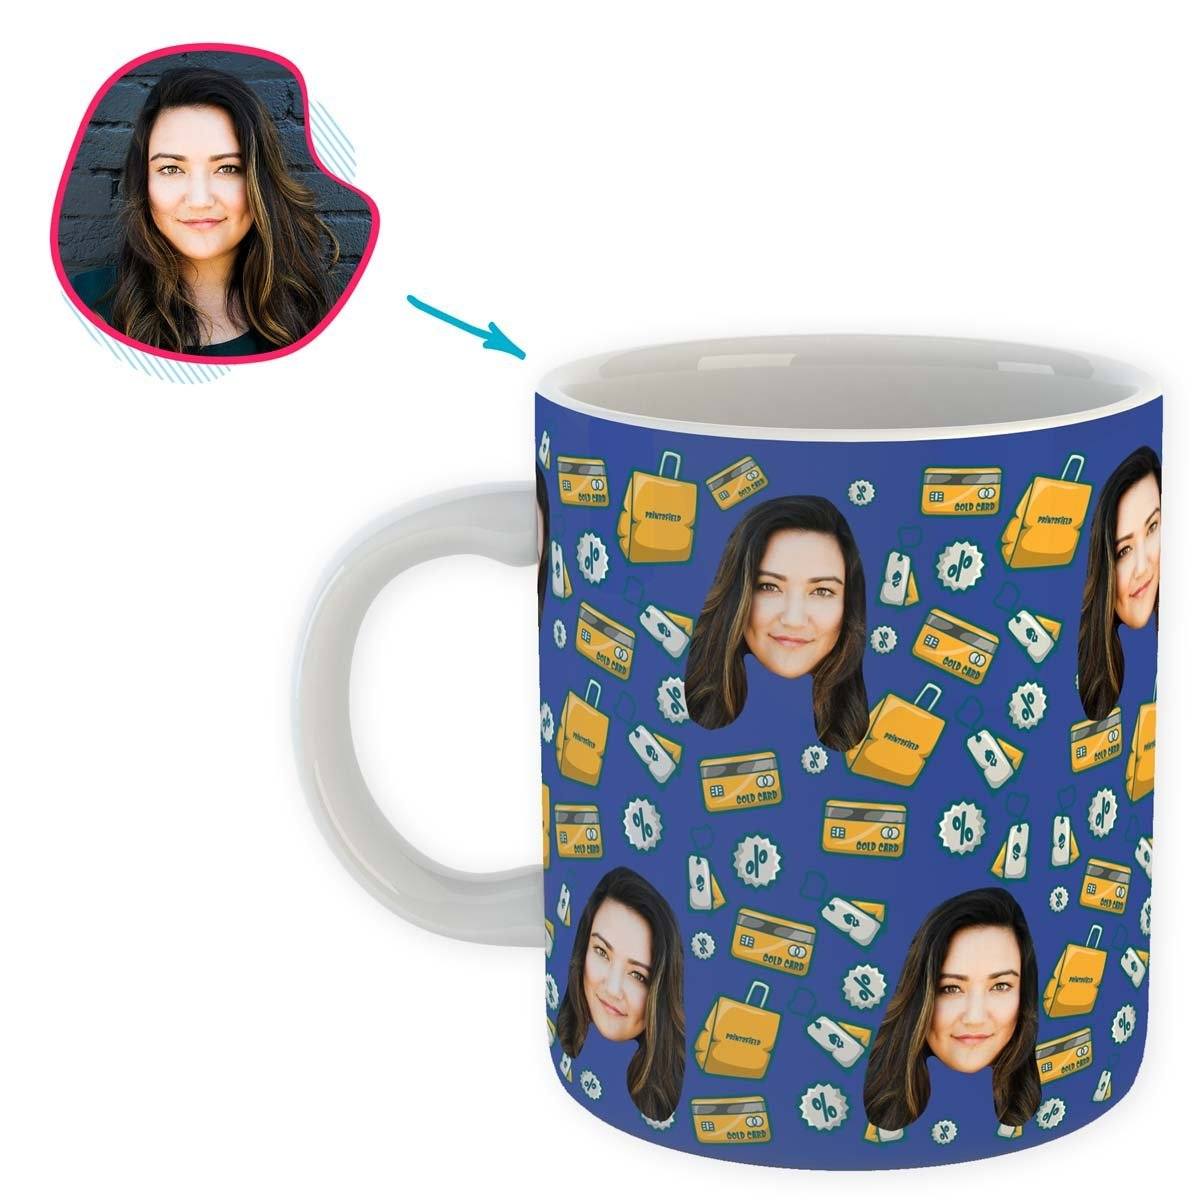 darkblue Shopping mug personalized with photo of face printed on it